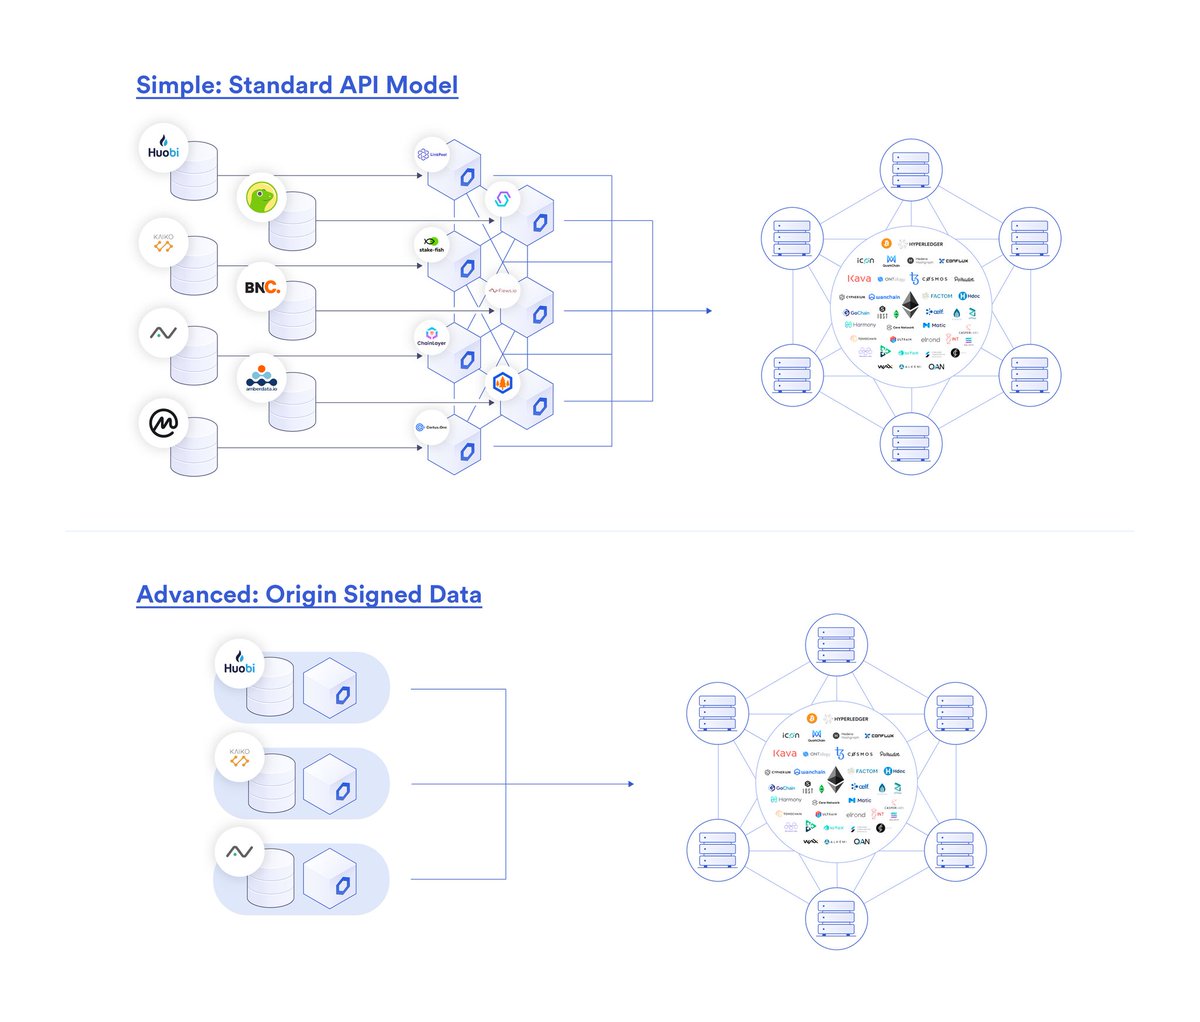 18/ There are two models through which  #Chainlink brings data on-chain1) A backwards compatible model where exisiting nodes transfer data between API providers and blockchains2) A advanced model where data providers run their own Chainlink node to provide signed data on-chain